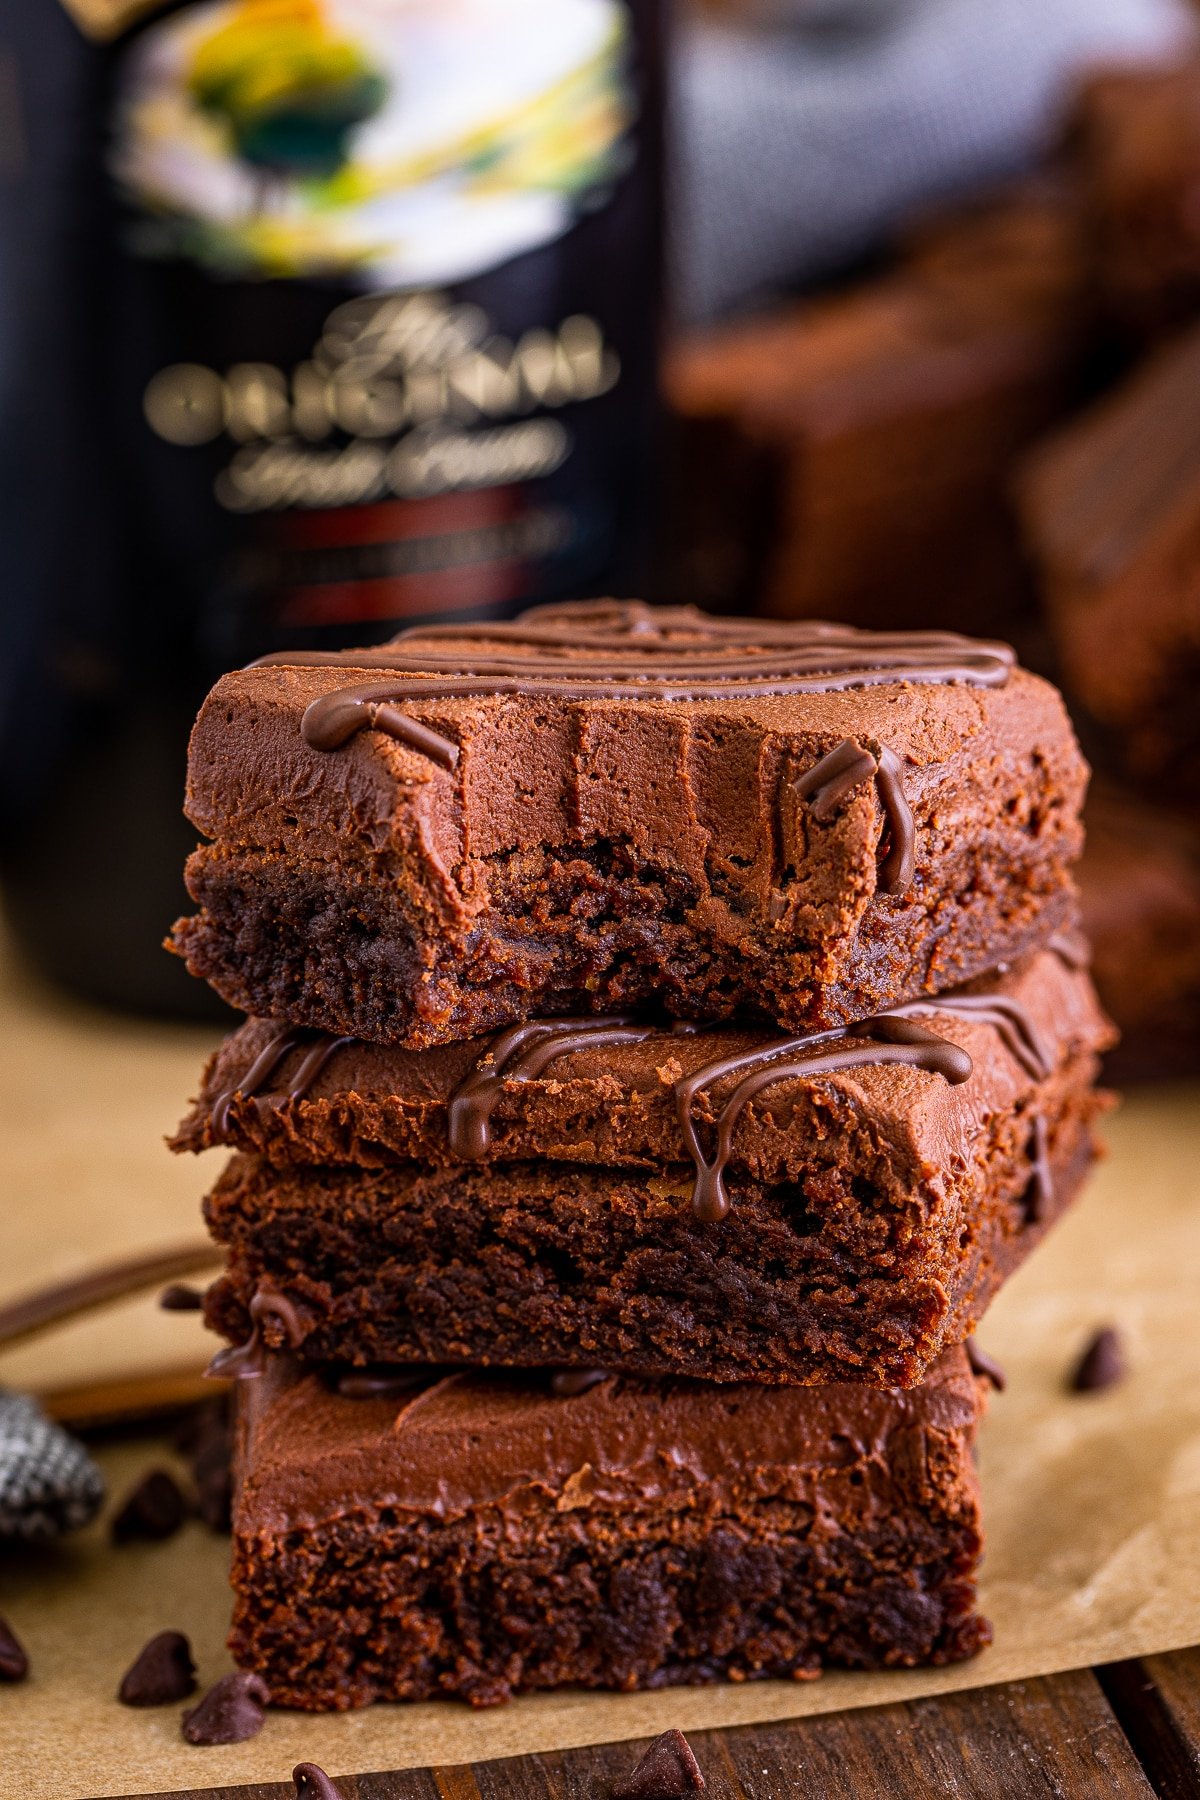 A 3 high stack of Bailey's Brownies with a bite taken out on top on brown parchment paper. Alcohol bottle in the background